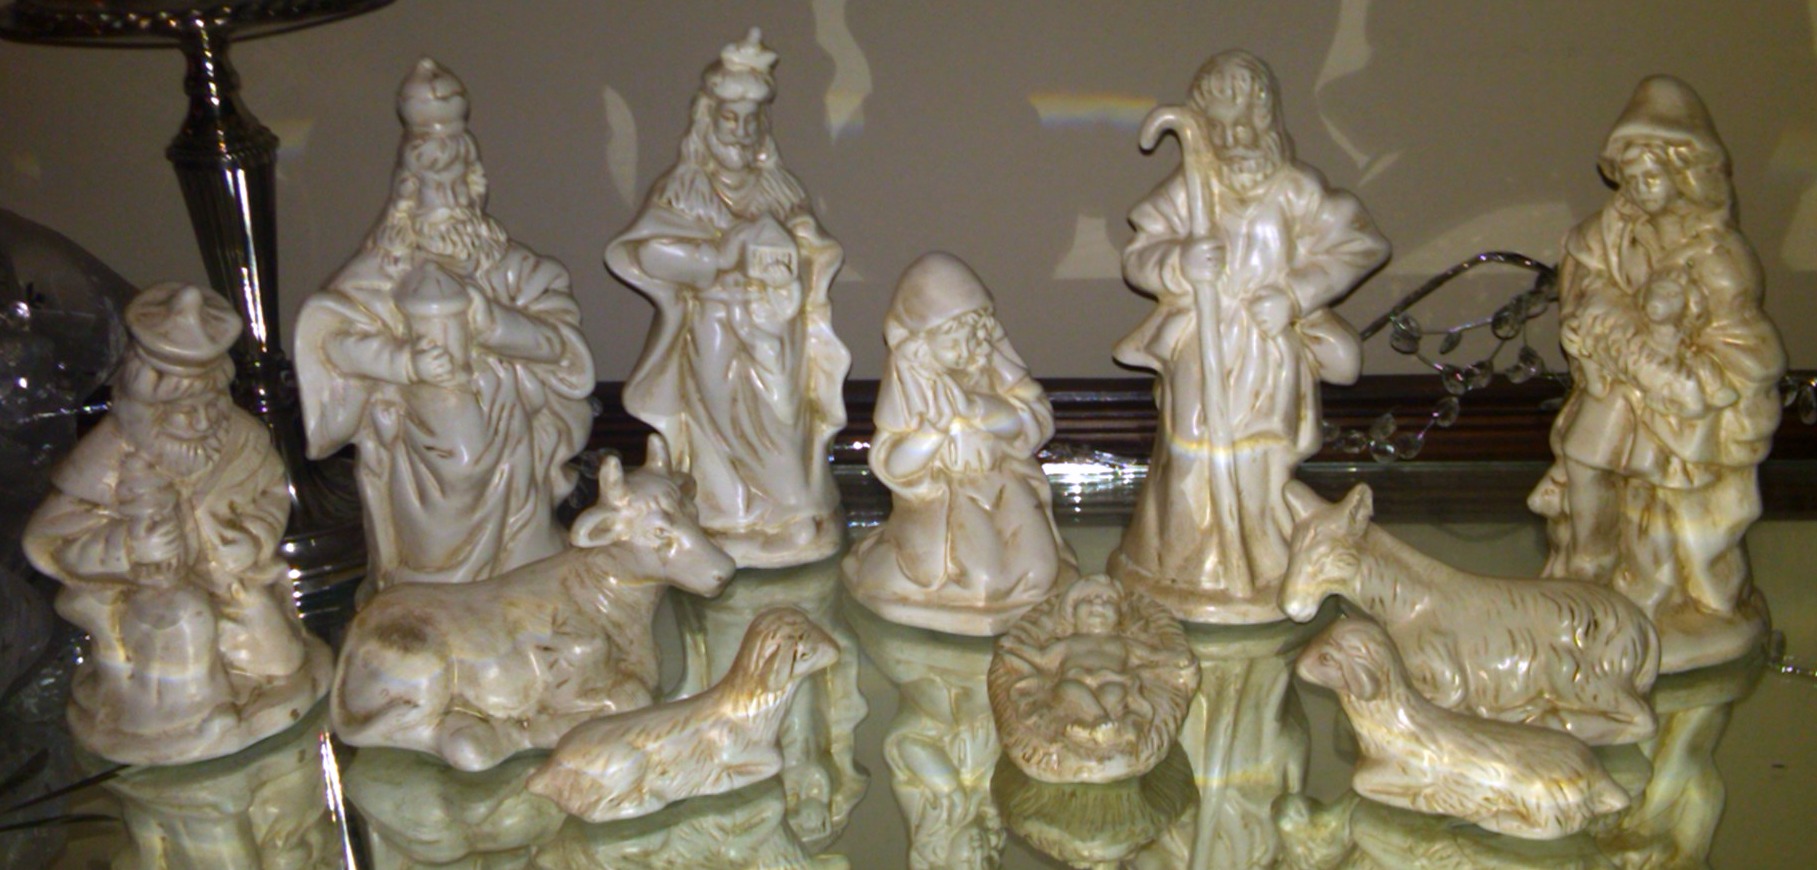 New Life to an Old Nativity